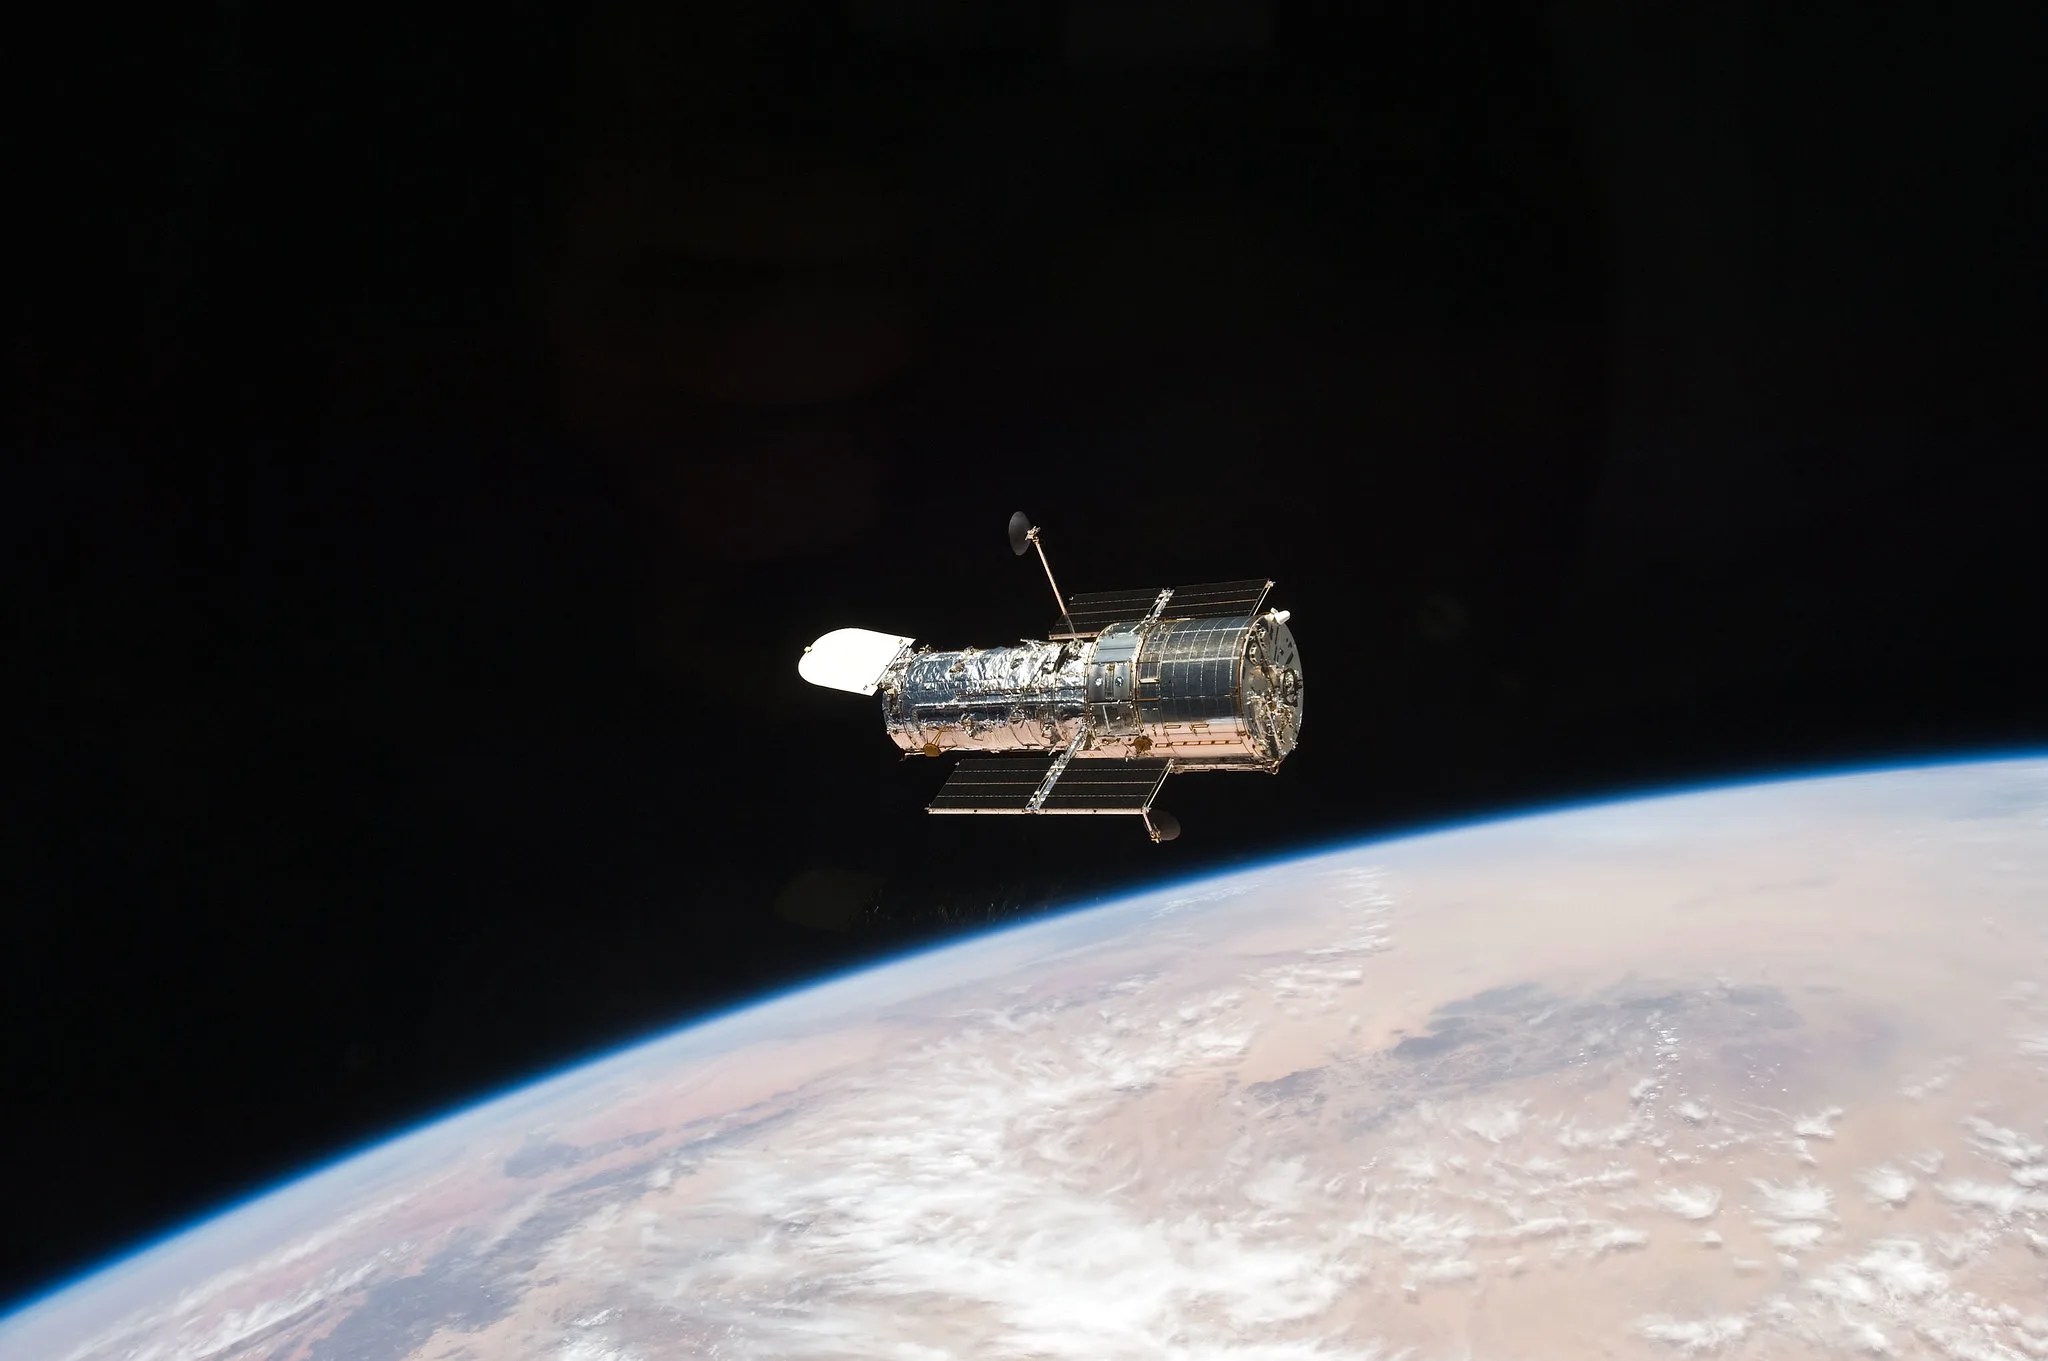 Photograph of the Hubble Space Telescope over the earth